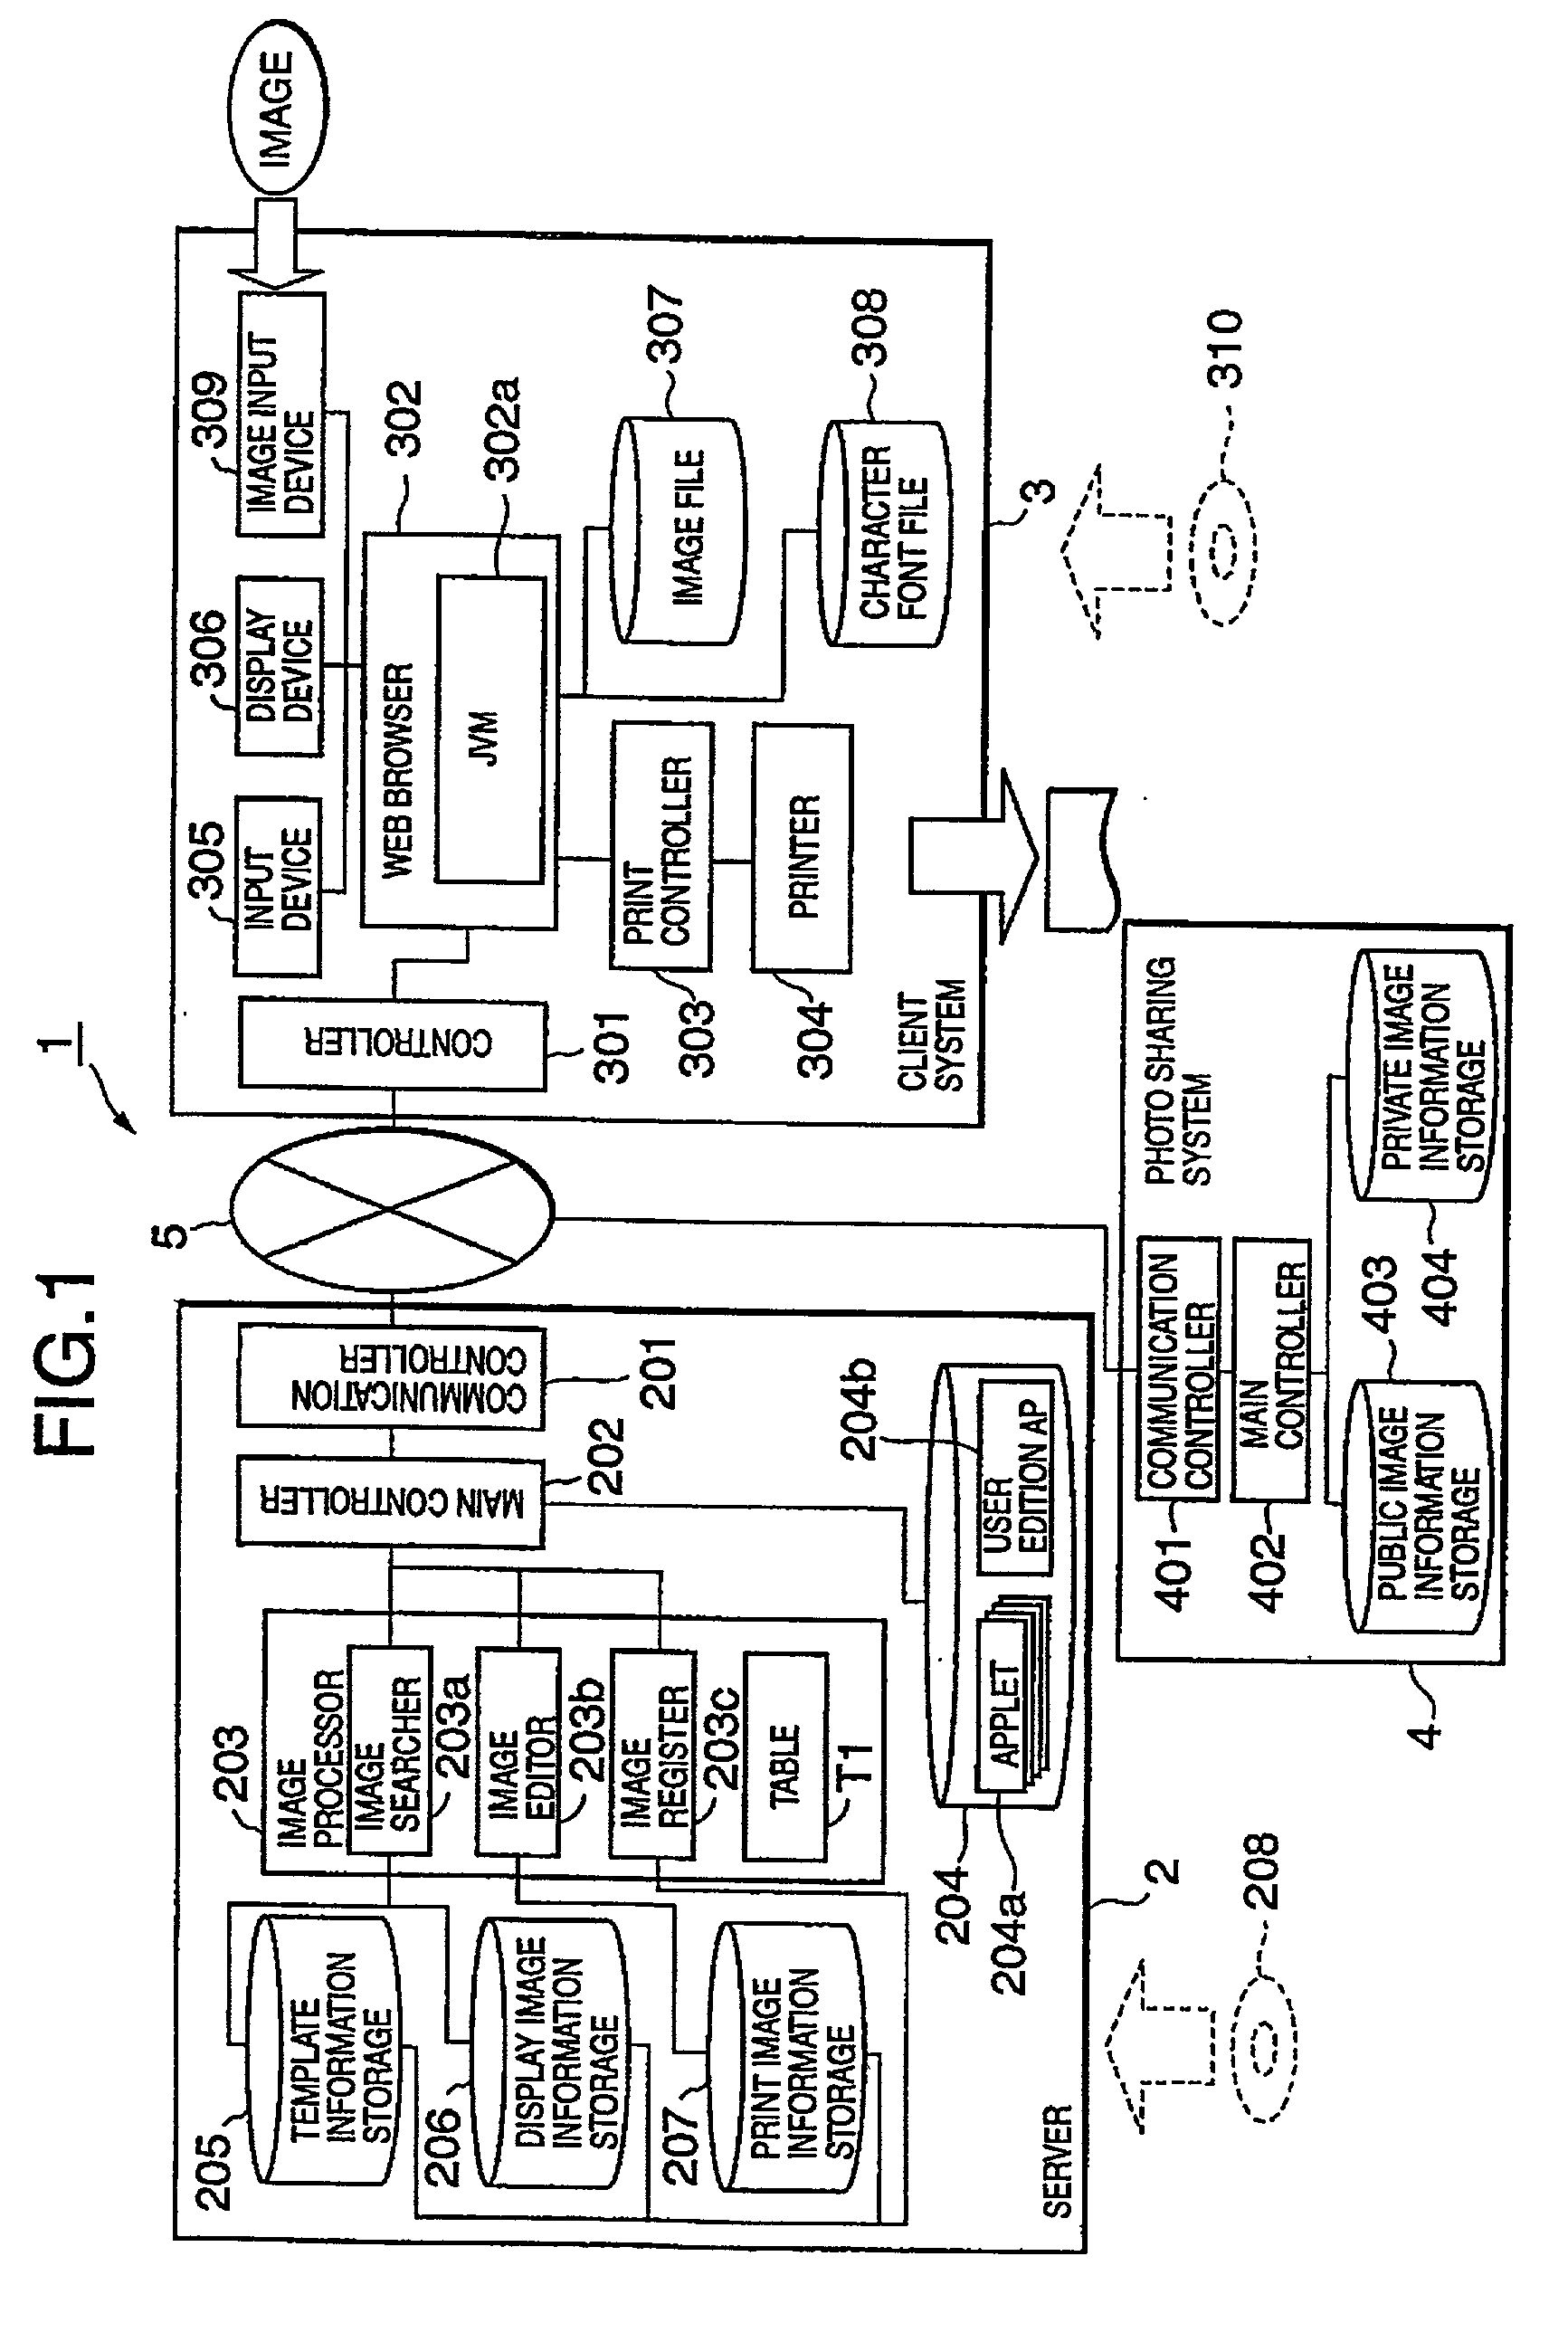 Image editing system and image editing method